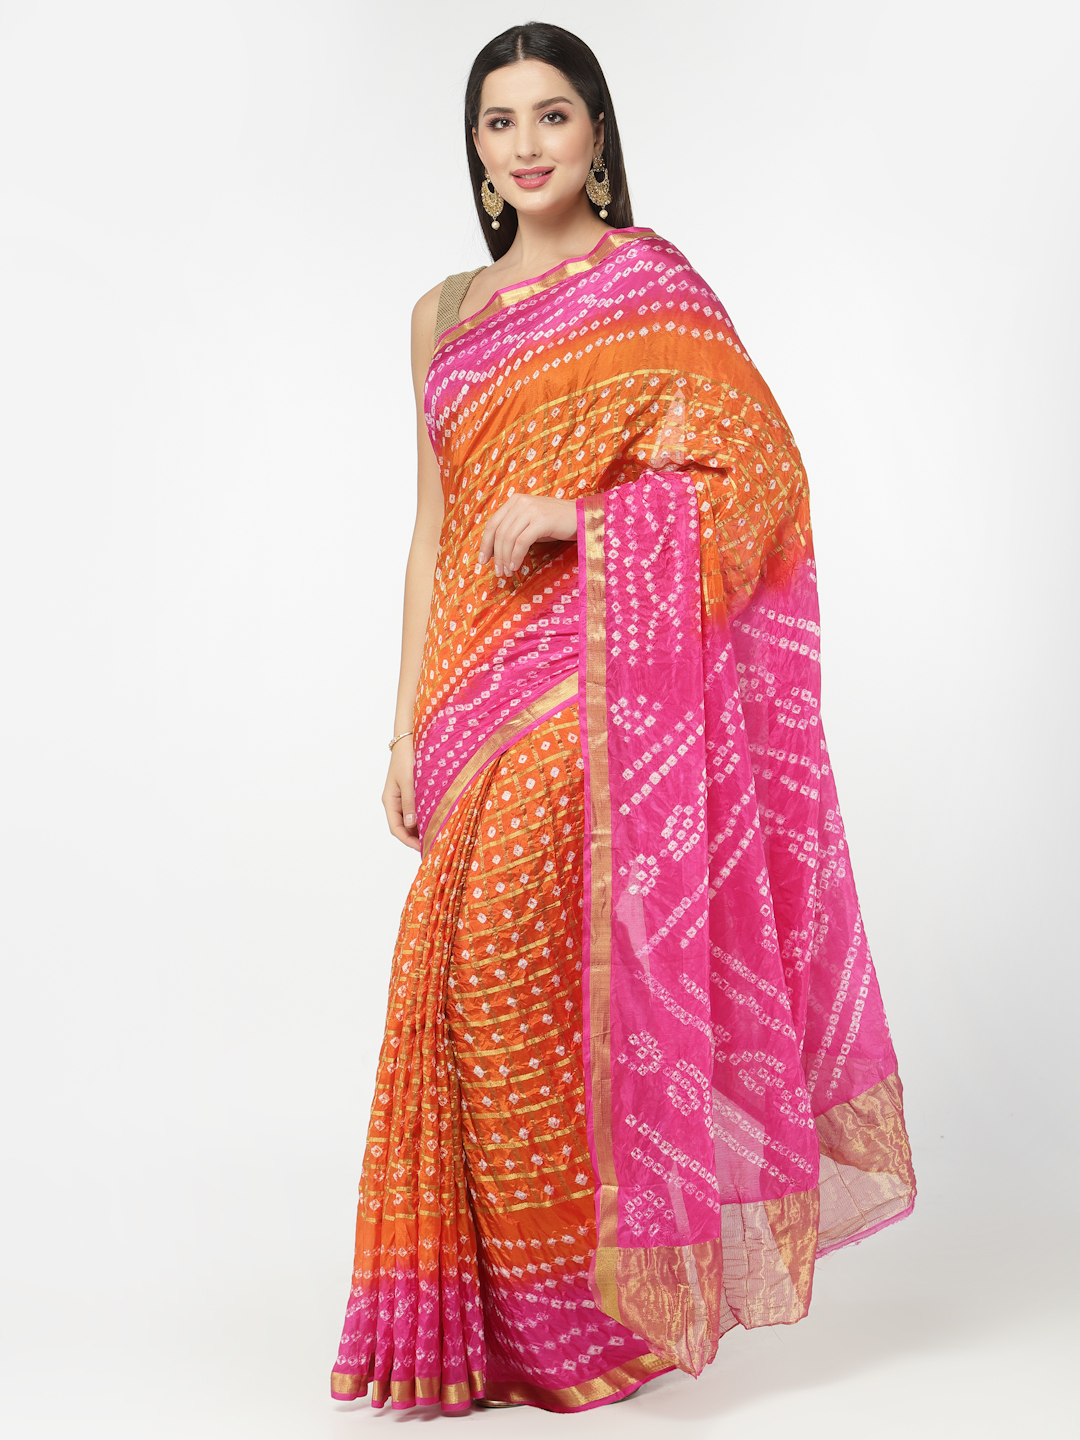 Women Silk Bandhani and Zari Weaving Saree with Unstitched Blouse - Orange And Pink